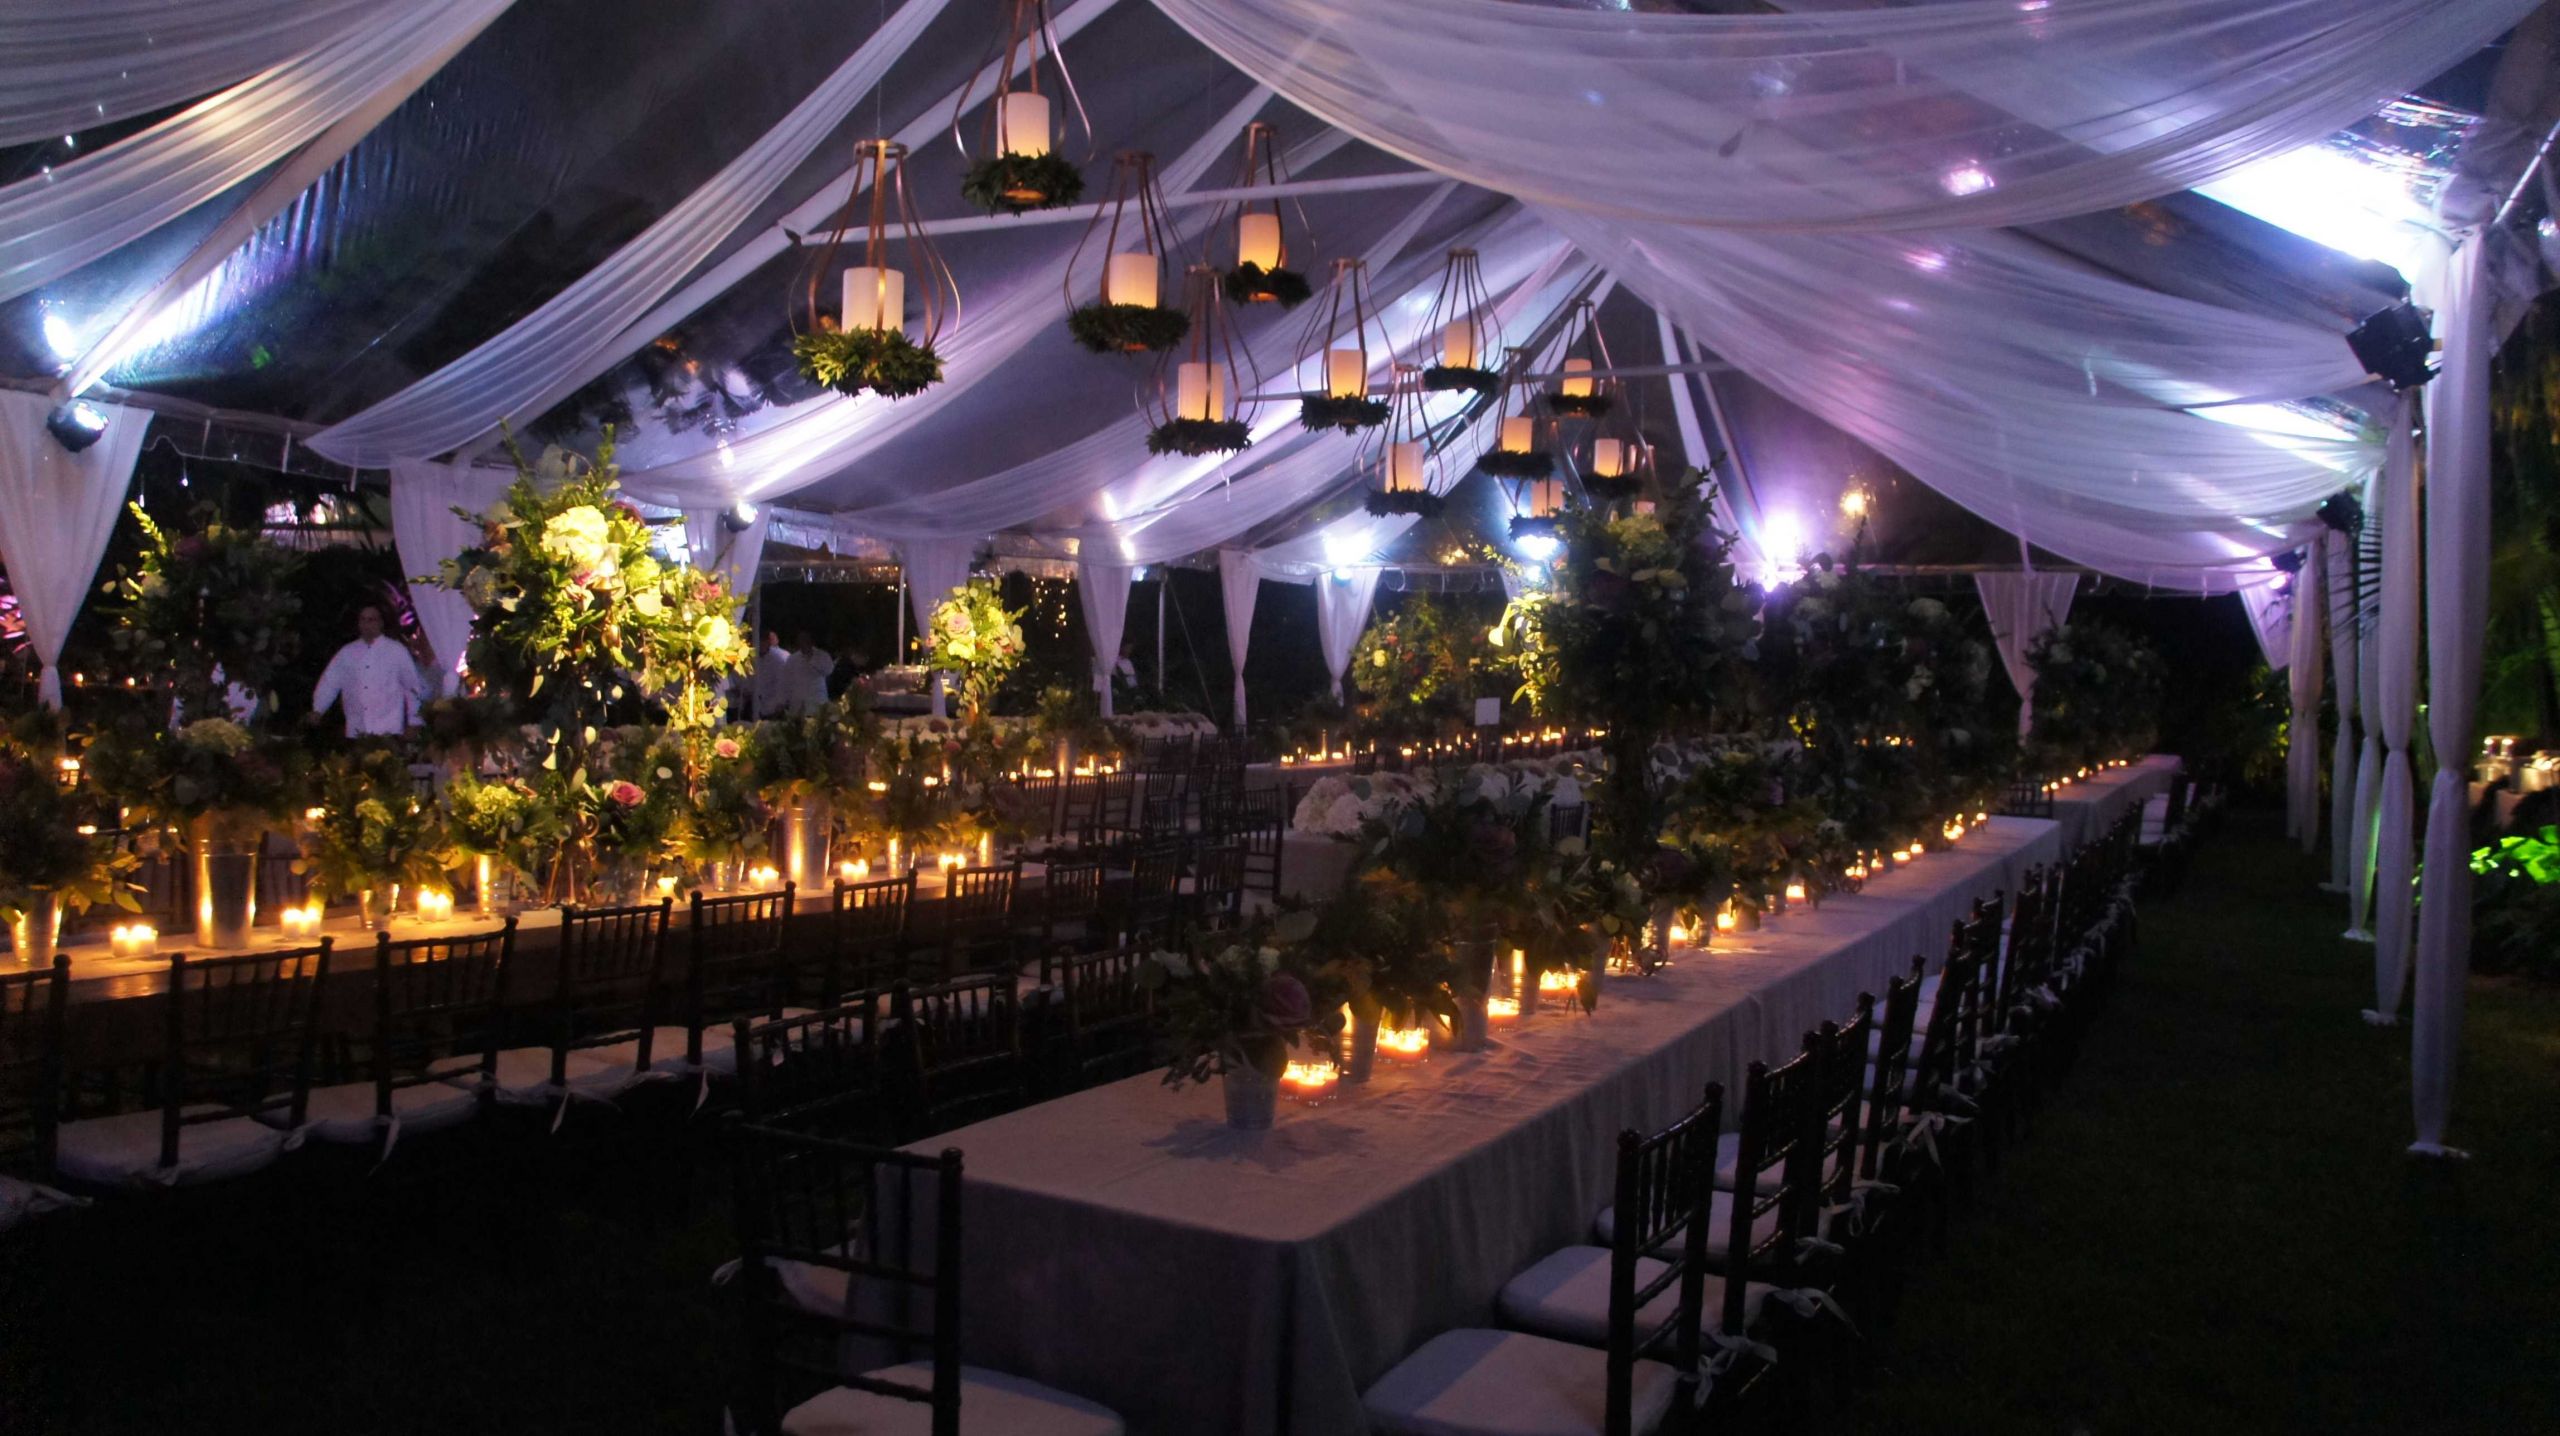 Backyard Party Ideas Lighting
 9 Great Party Tent Lighting Ideas For Outdoor Events